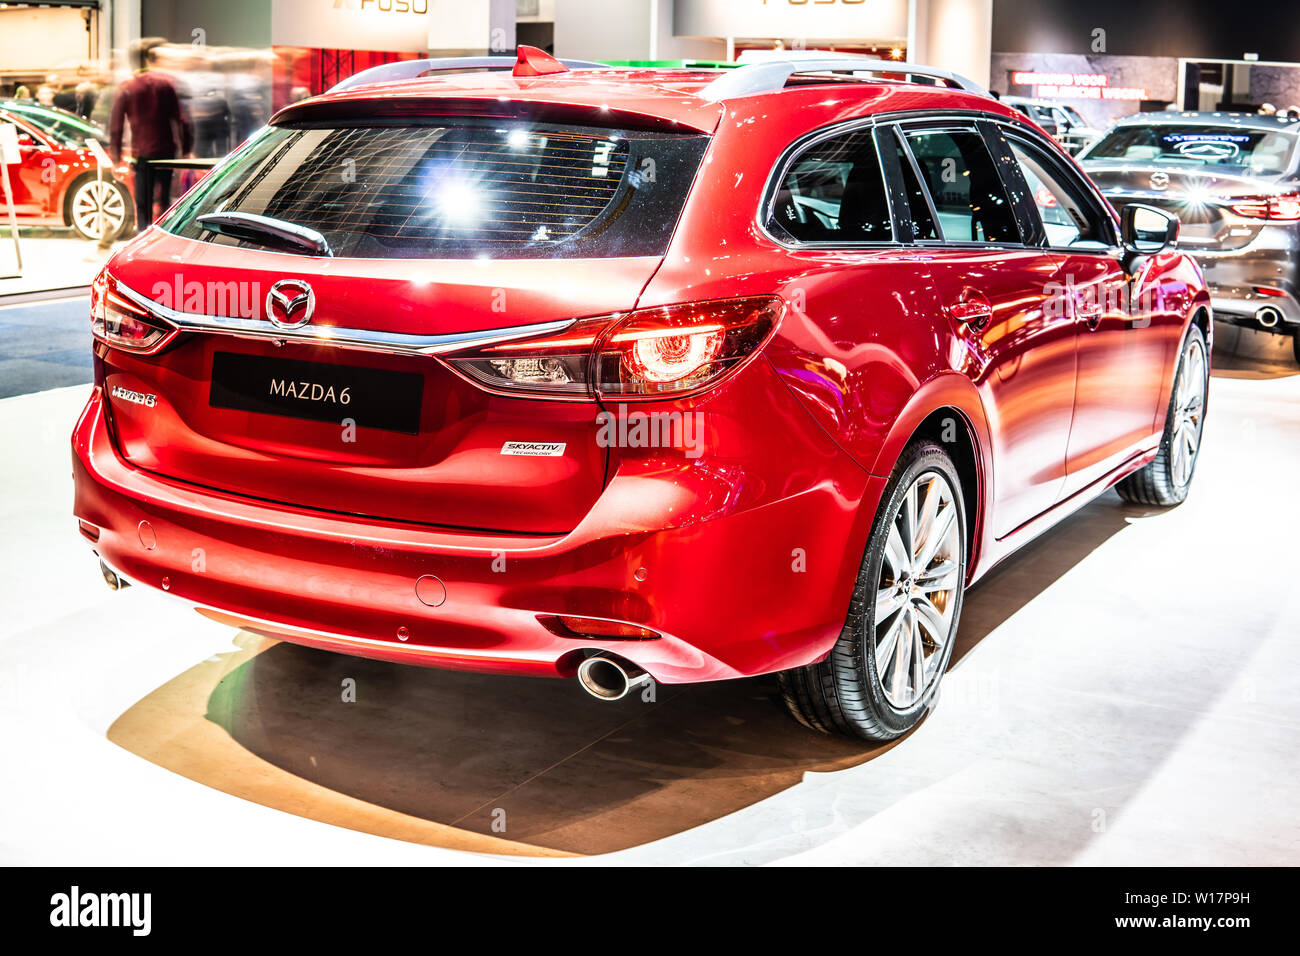 Vrijlating Ga trouwen Midden Brussels, Belgium, Jan 2019 red Mazda 6 station wagon, Brussels Motor Show,  3rd gen, GL, facelift, mid-size car manufactured in Japan by Mazda Stock  Photo - Alamy